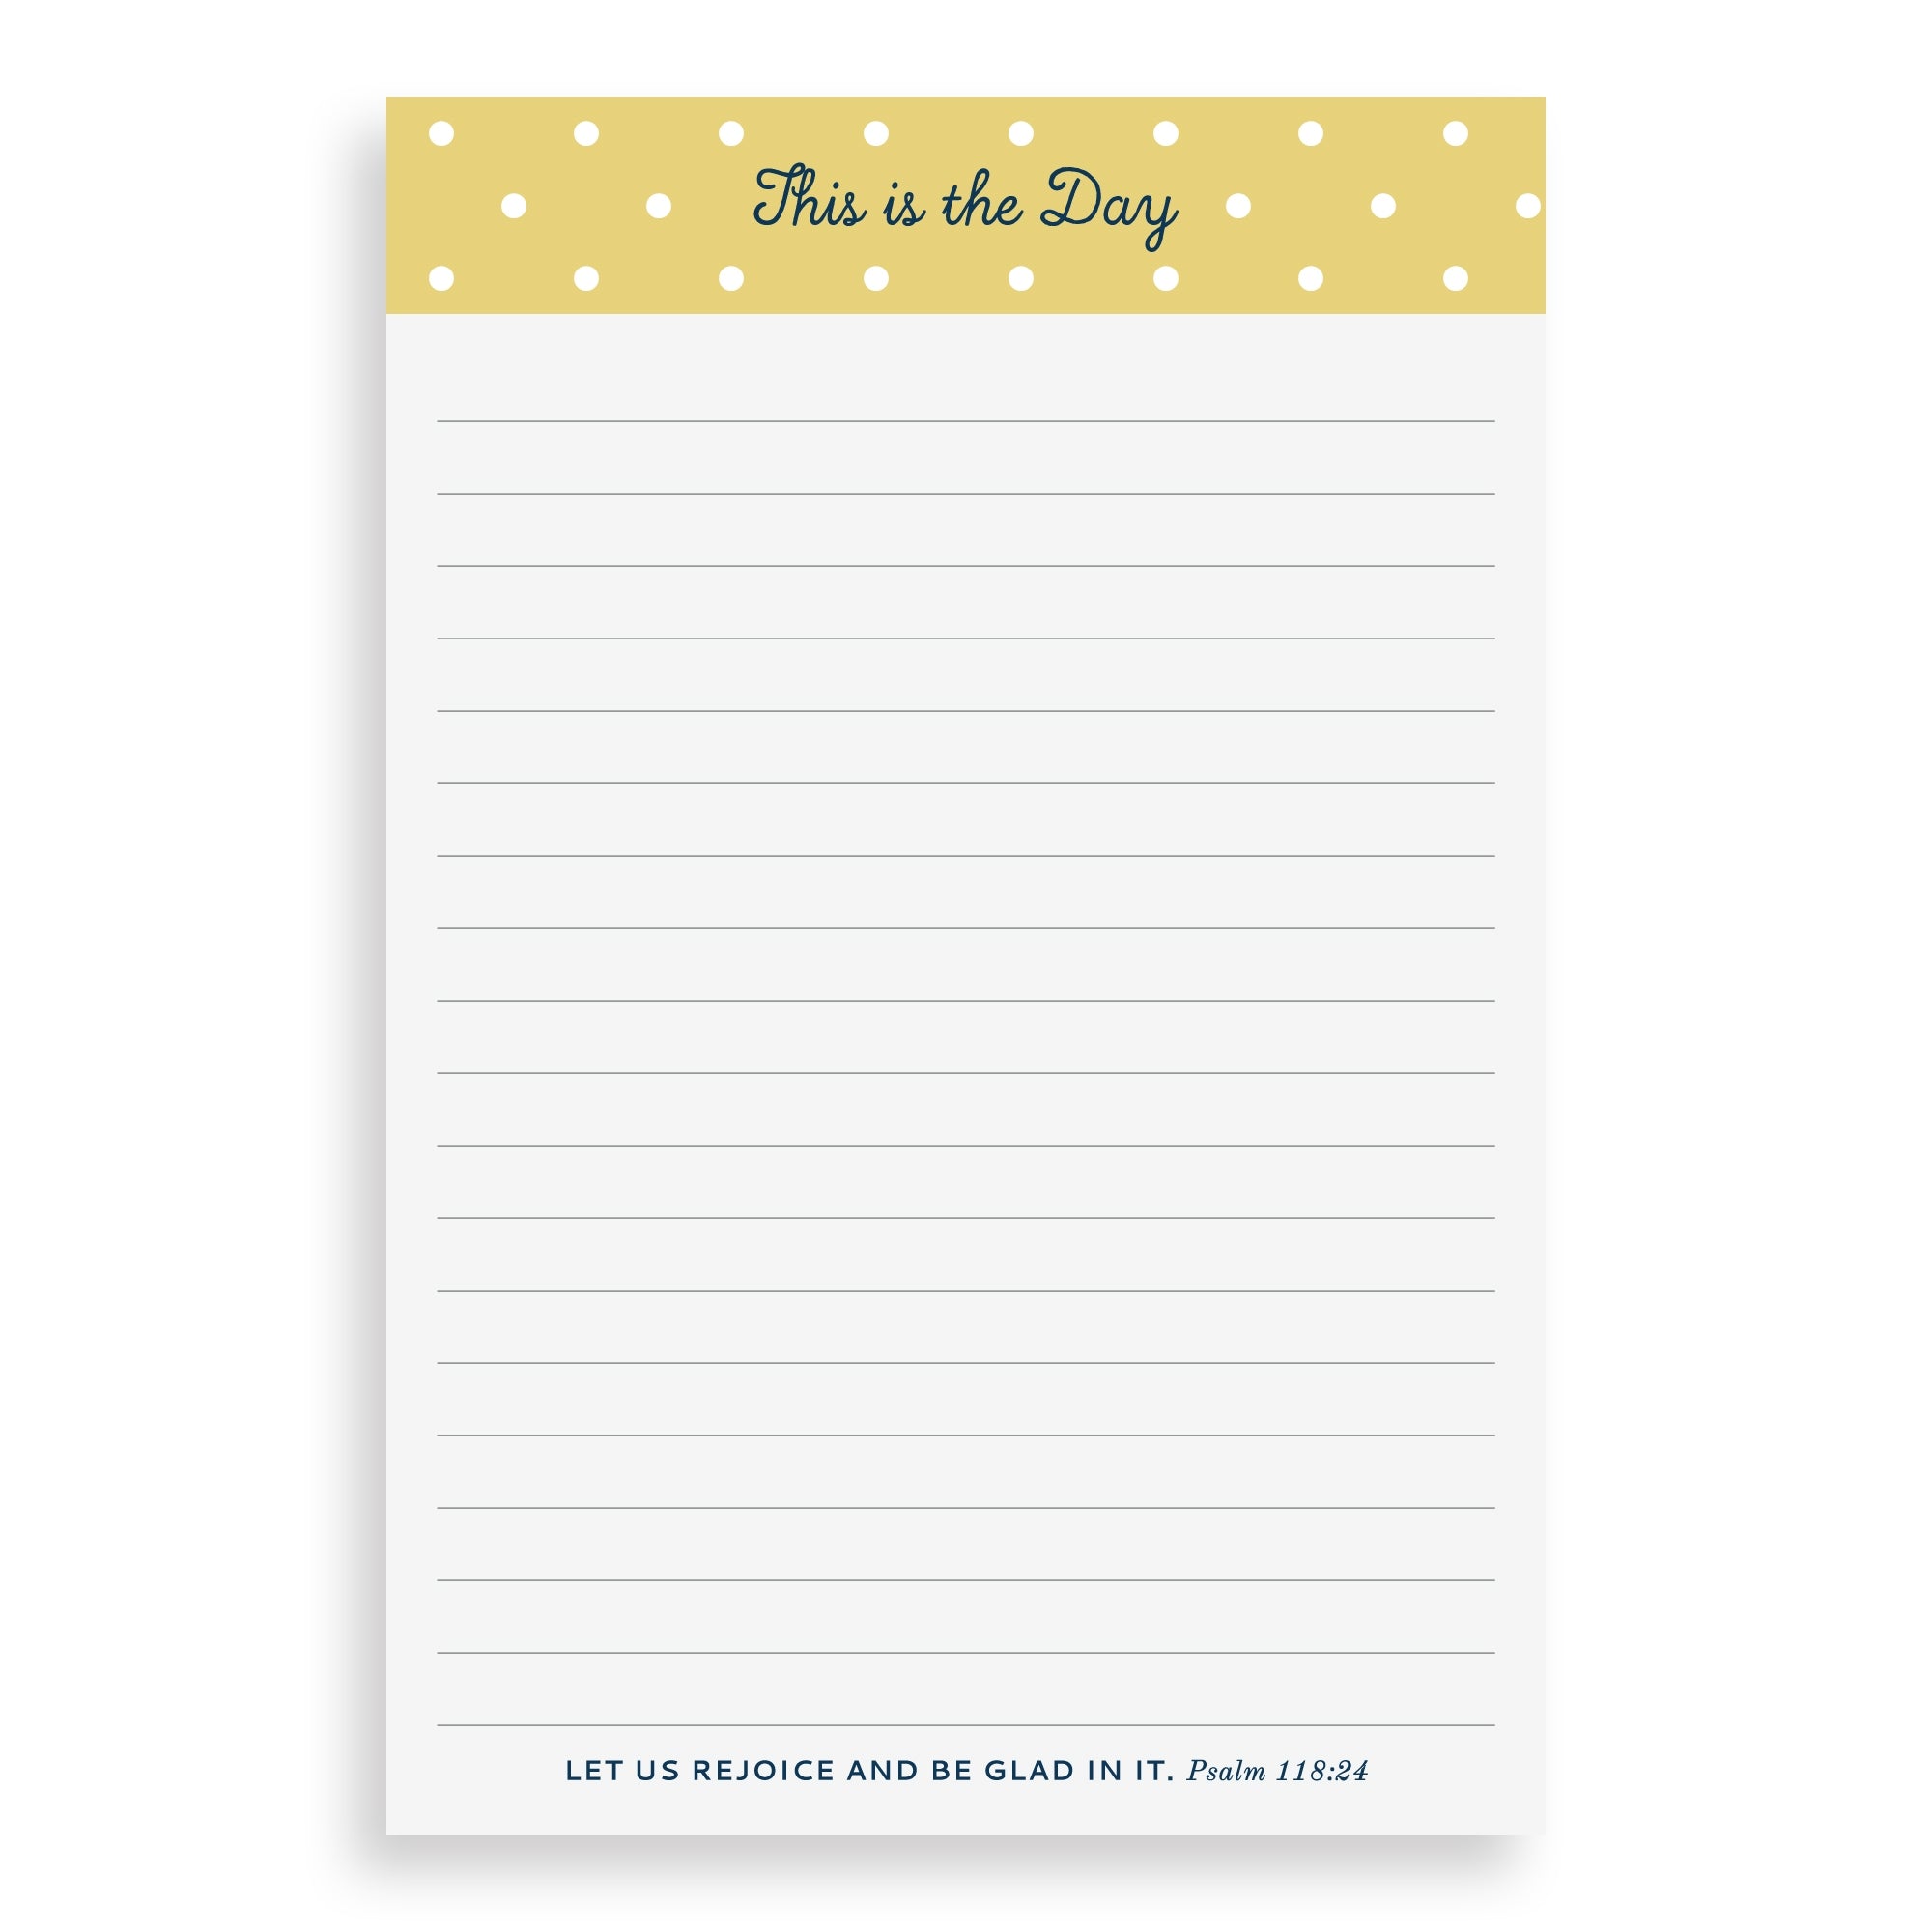 Cute stationary notepad with scripture.